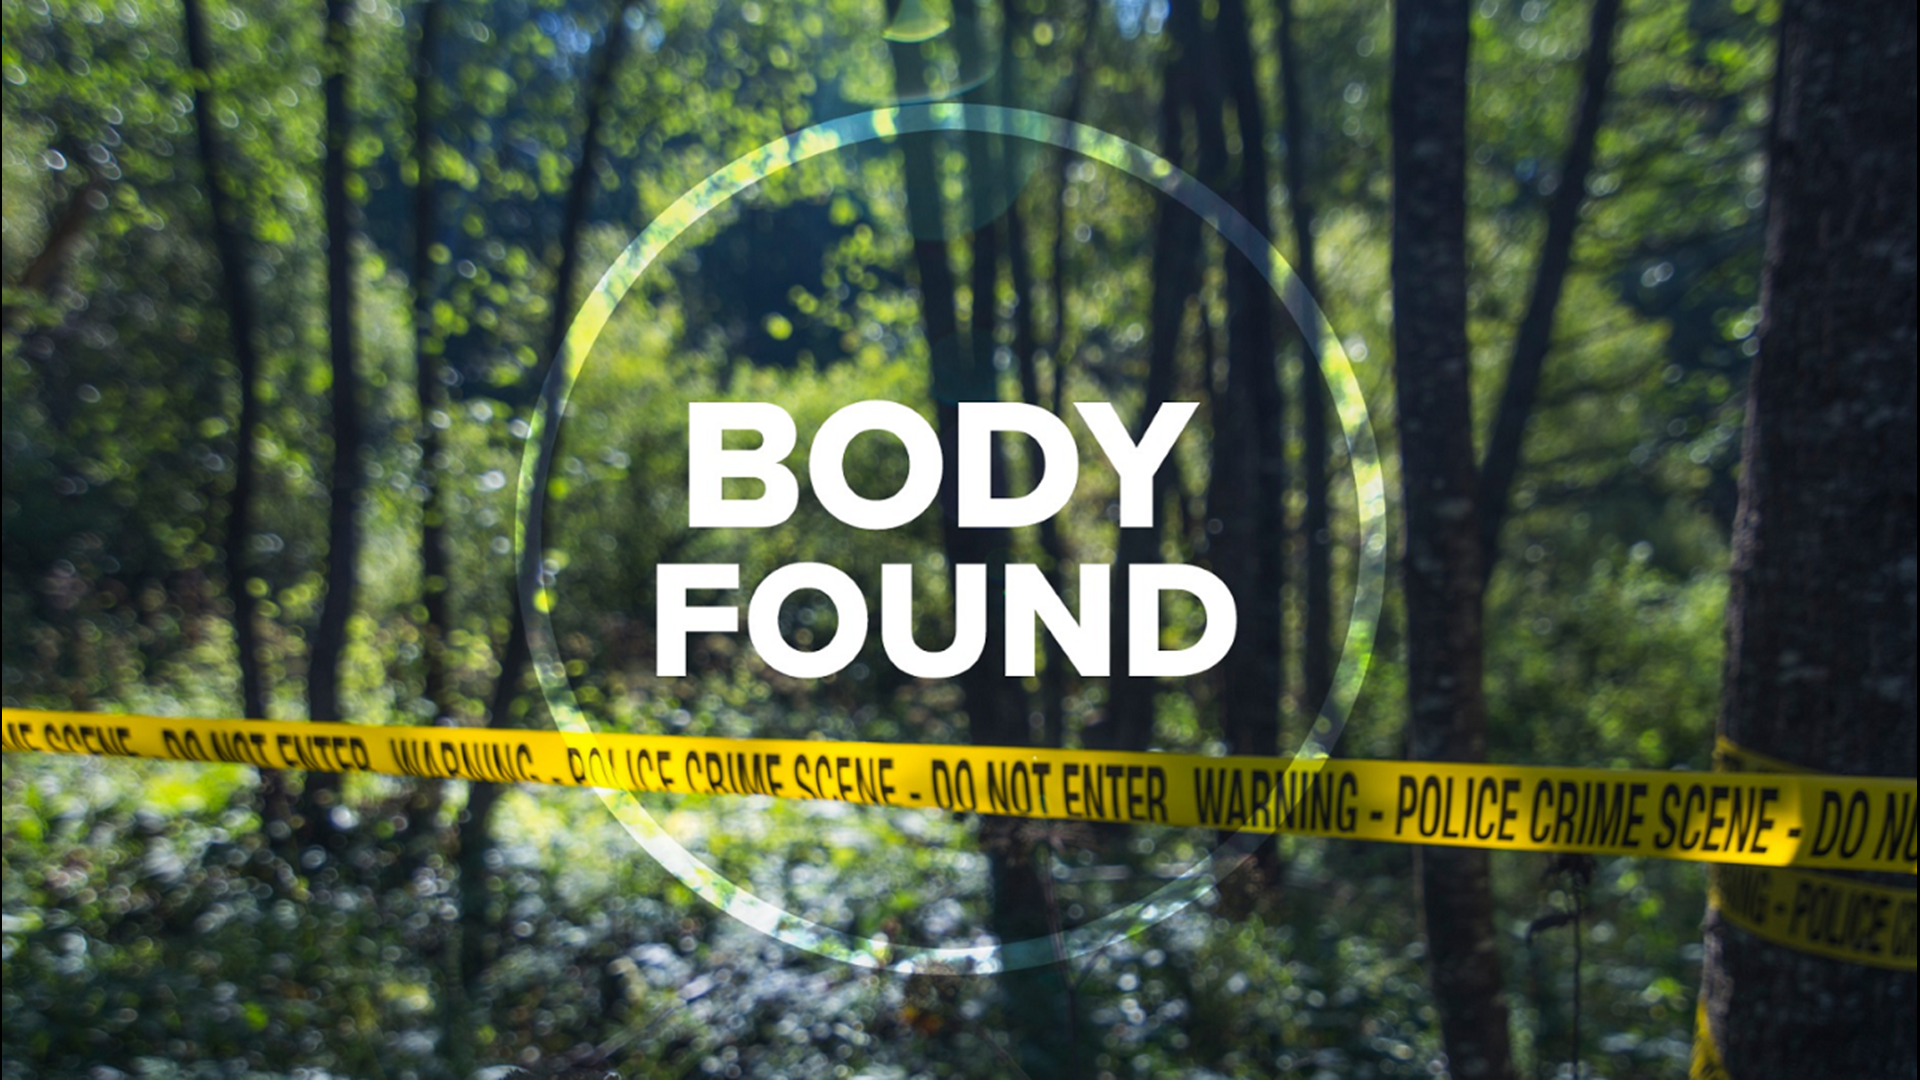 The body of a woman was found near Highway 87. No other details have been released at this time.